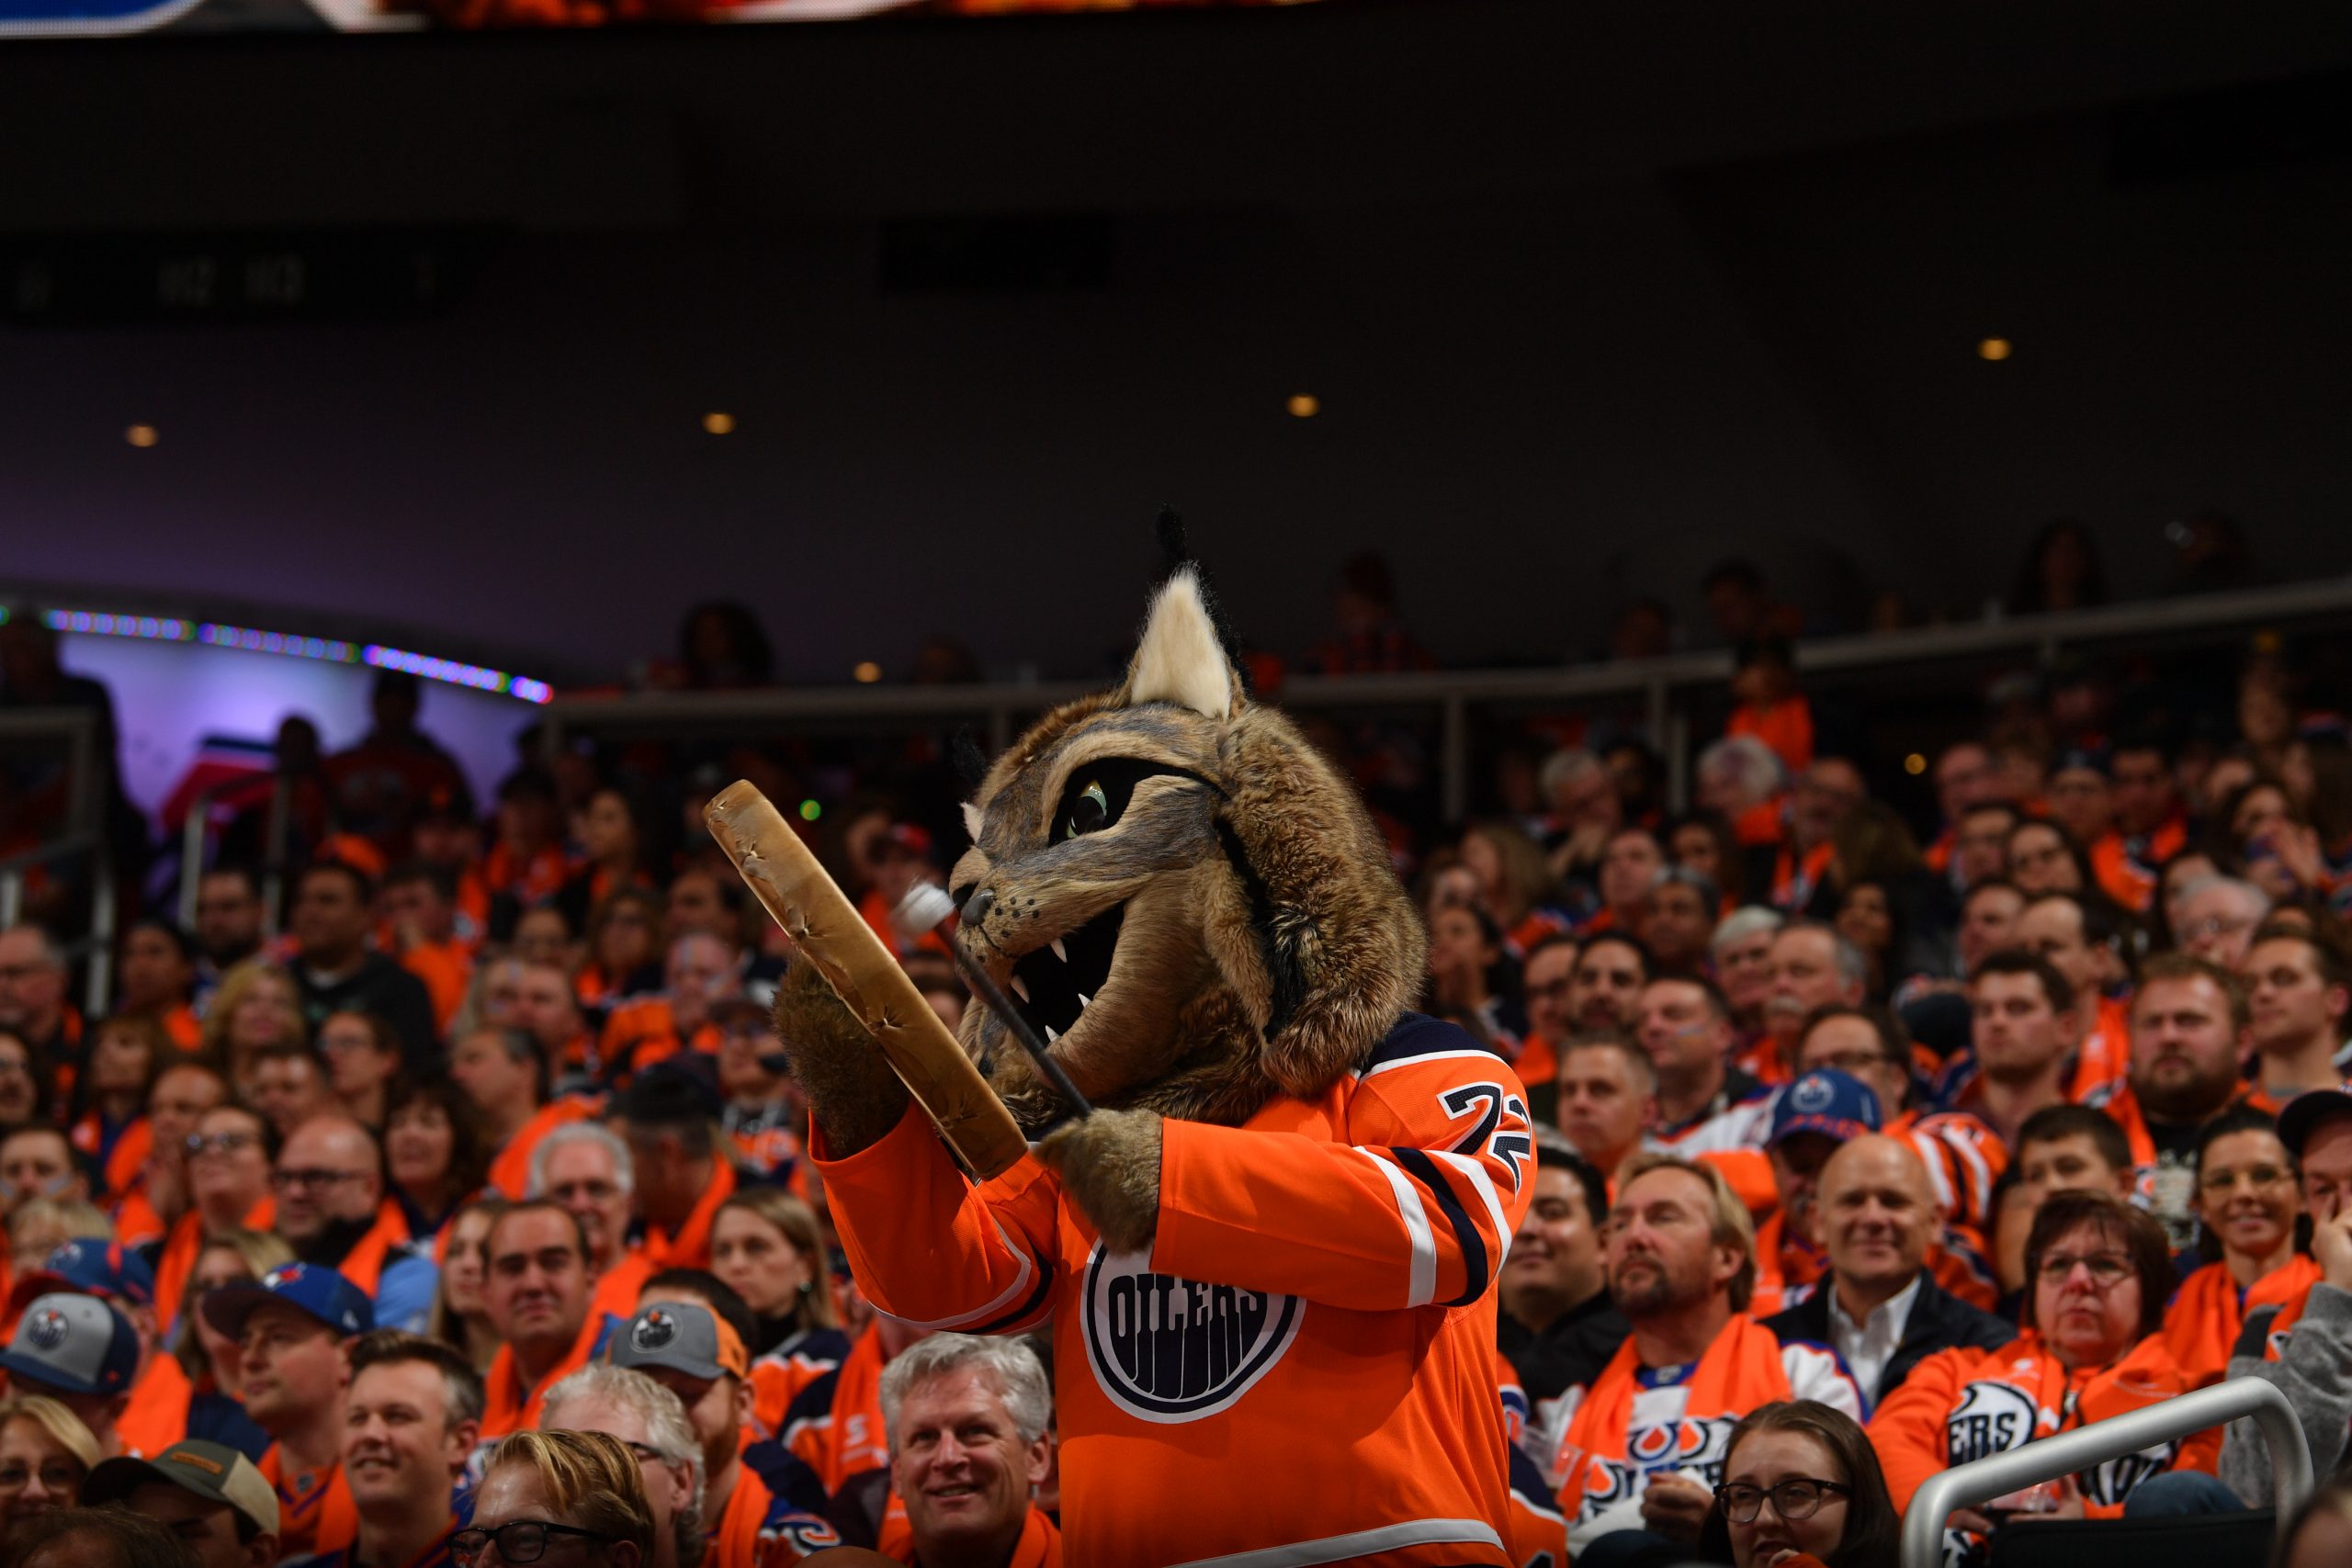 On the Prowl A “Conversation” with the Oilers’ Mascot Edify.